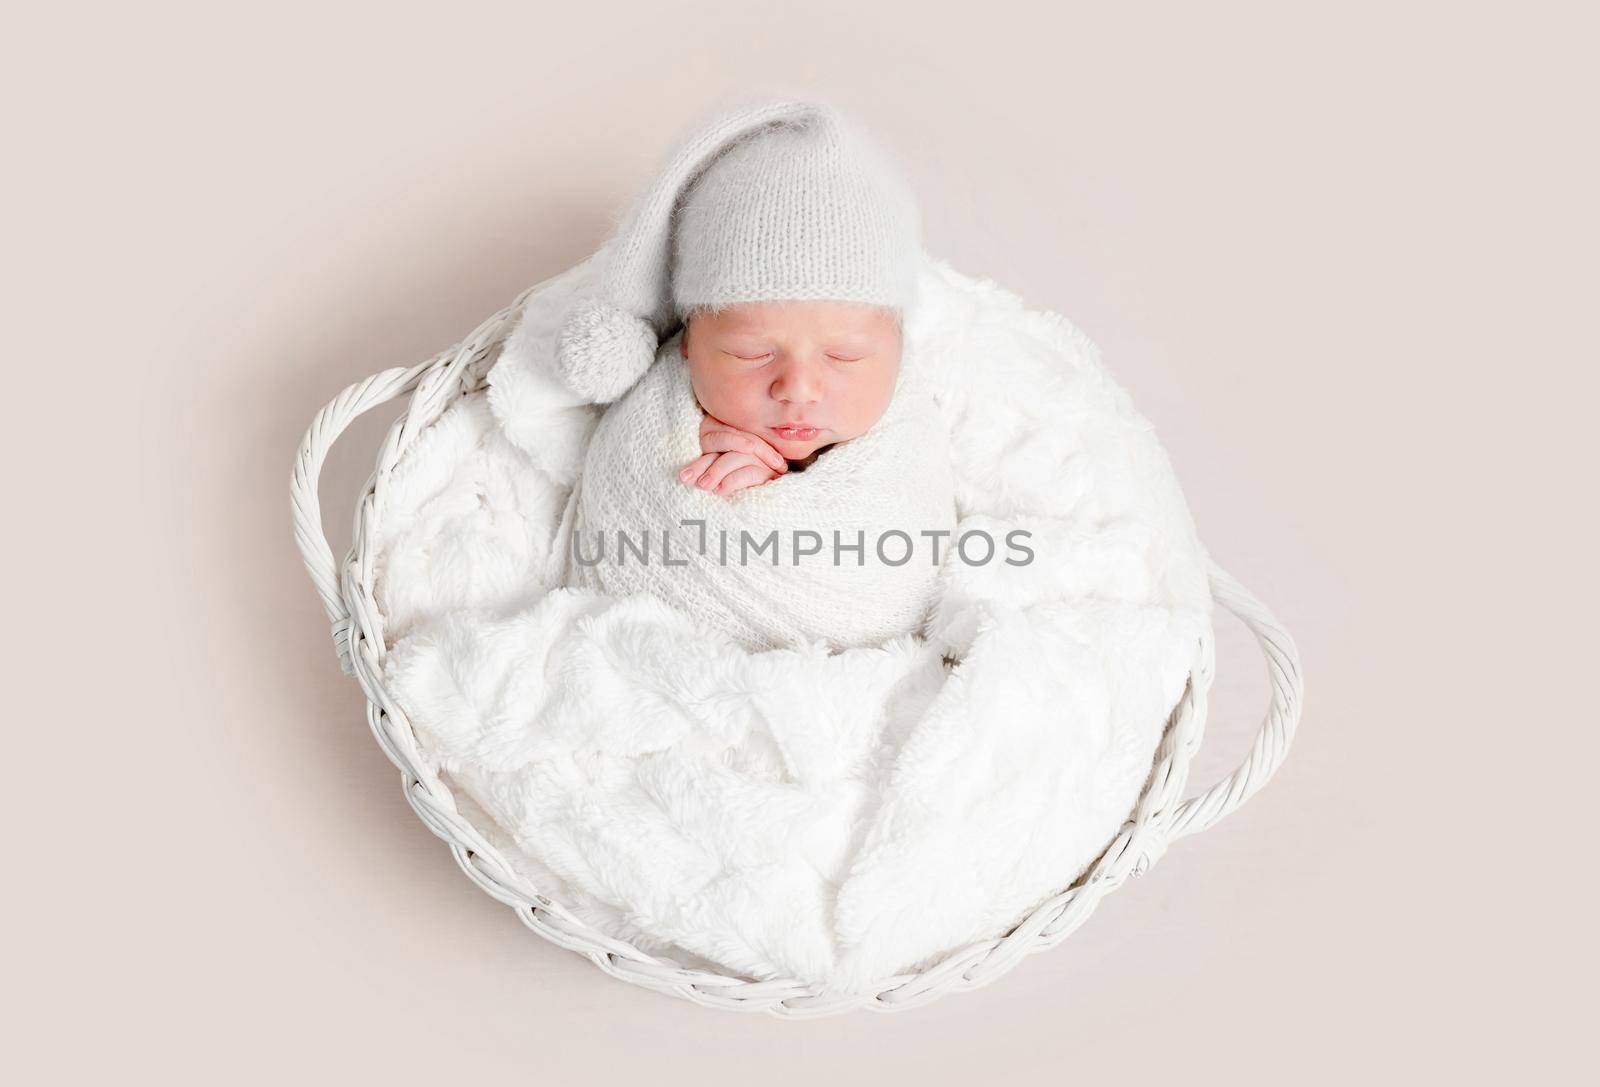 Top view of newborn baby wrapped in white wrap wearing white bonnet and lying on white round basket with soft blanket. Newborn baby in white outfit